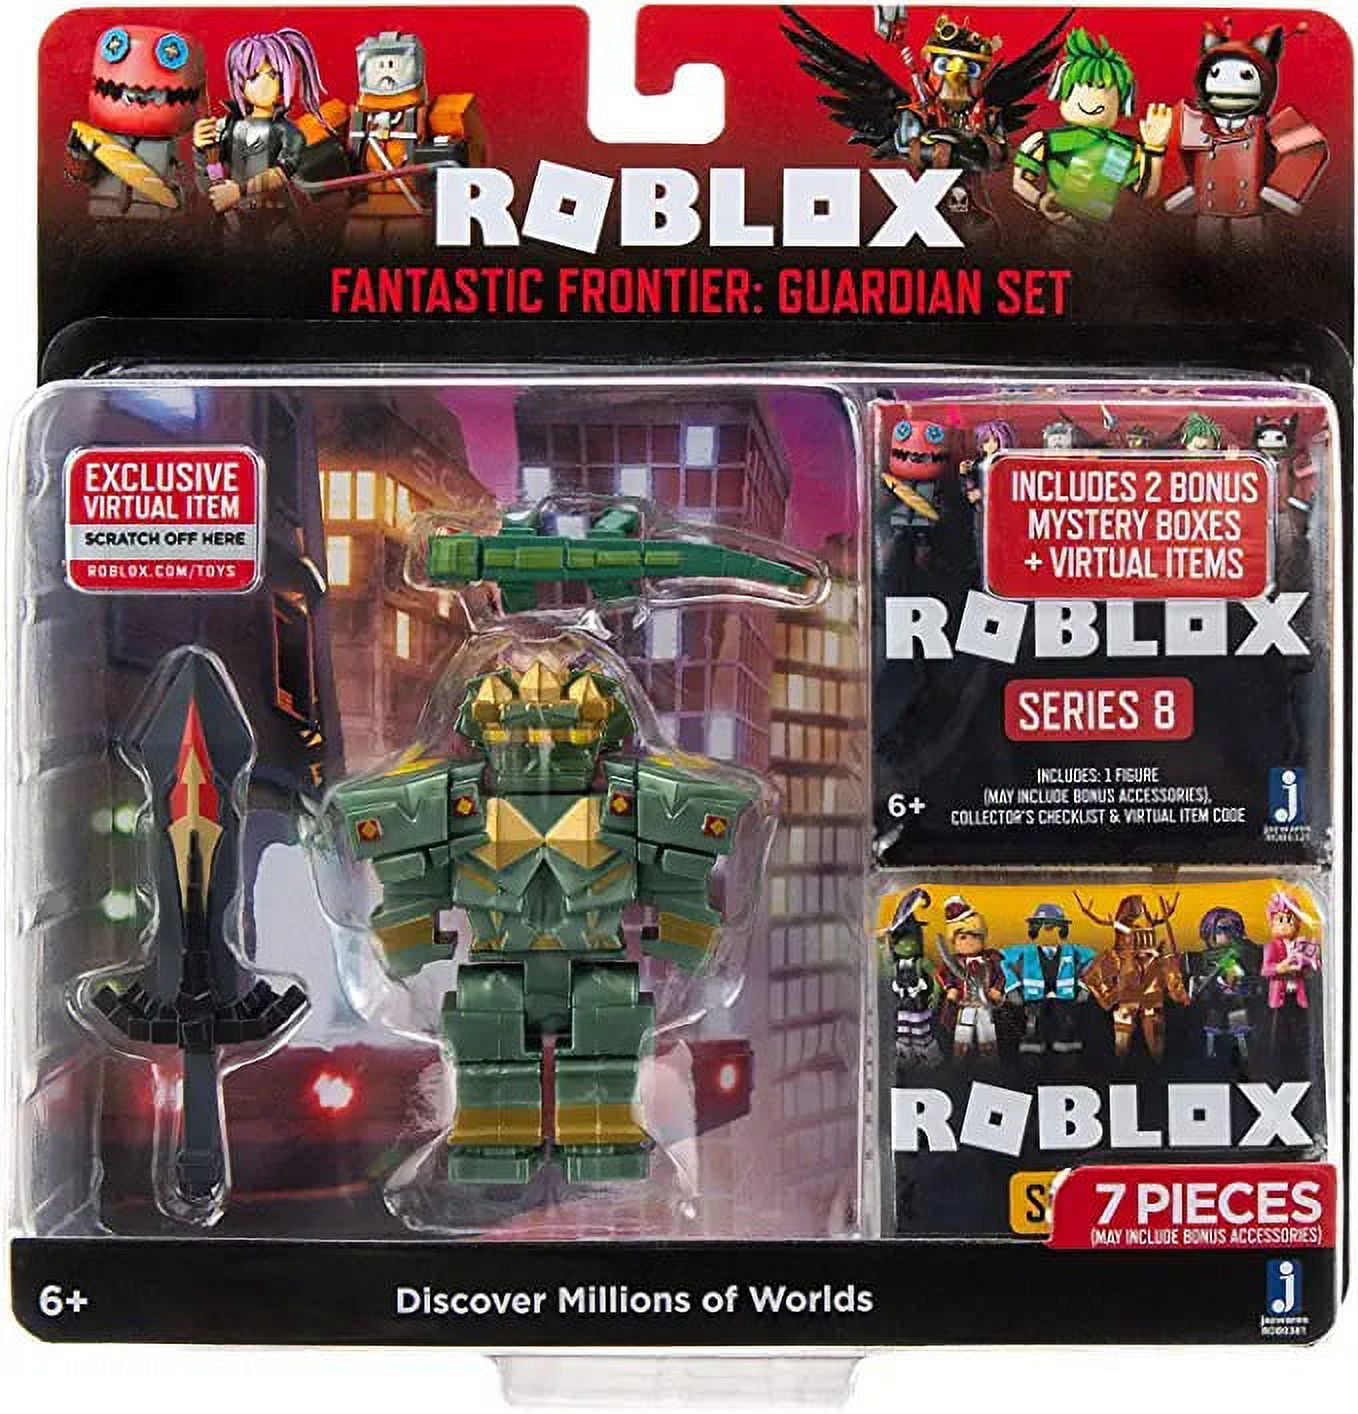 Which Roblox Accessories Have Secret Special Effects? FIND OUT HERE!! 